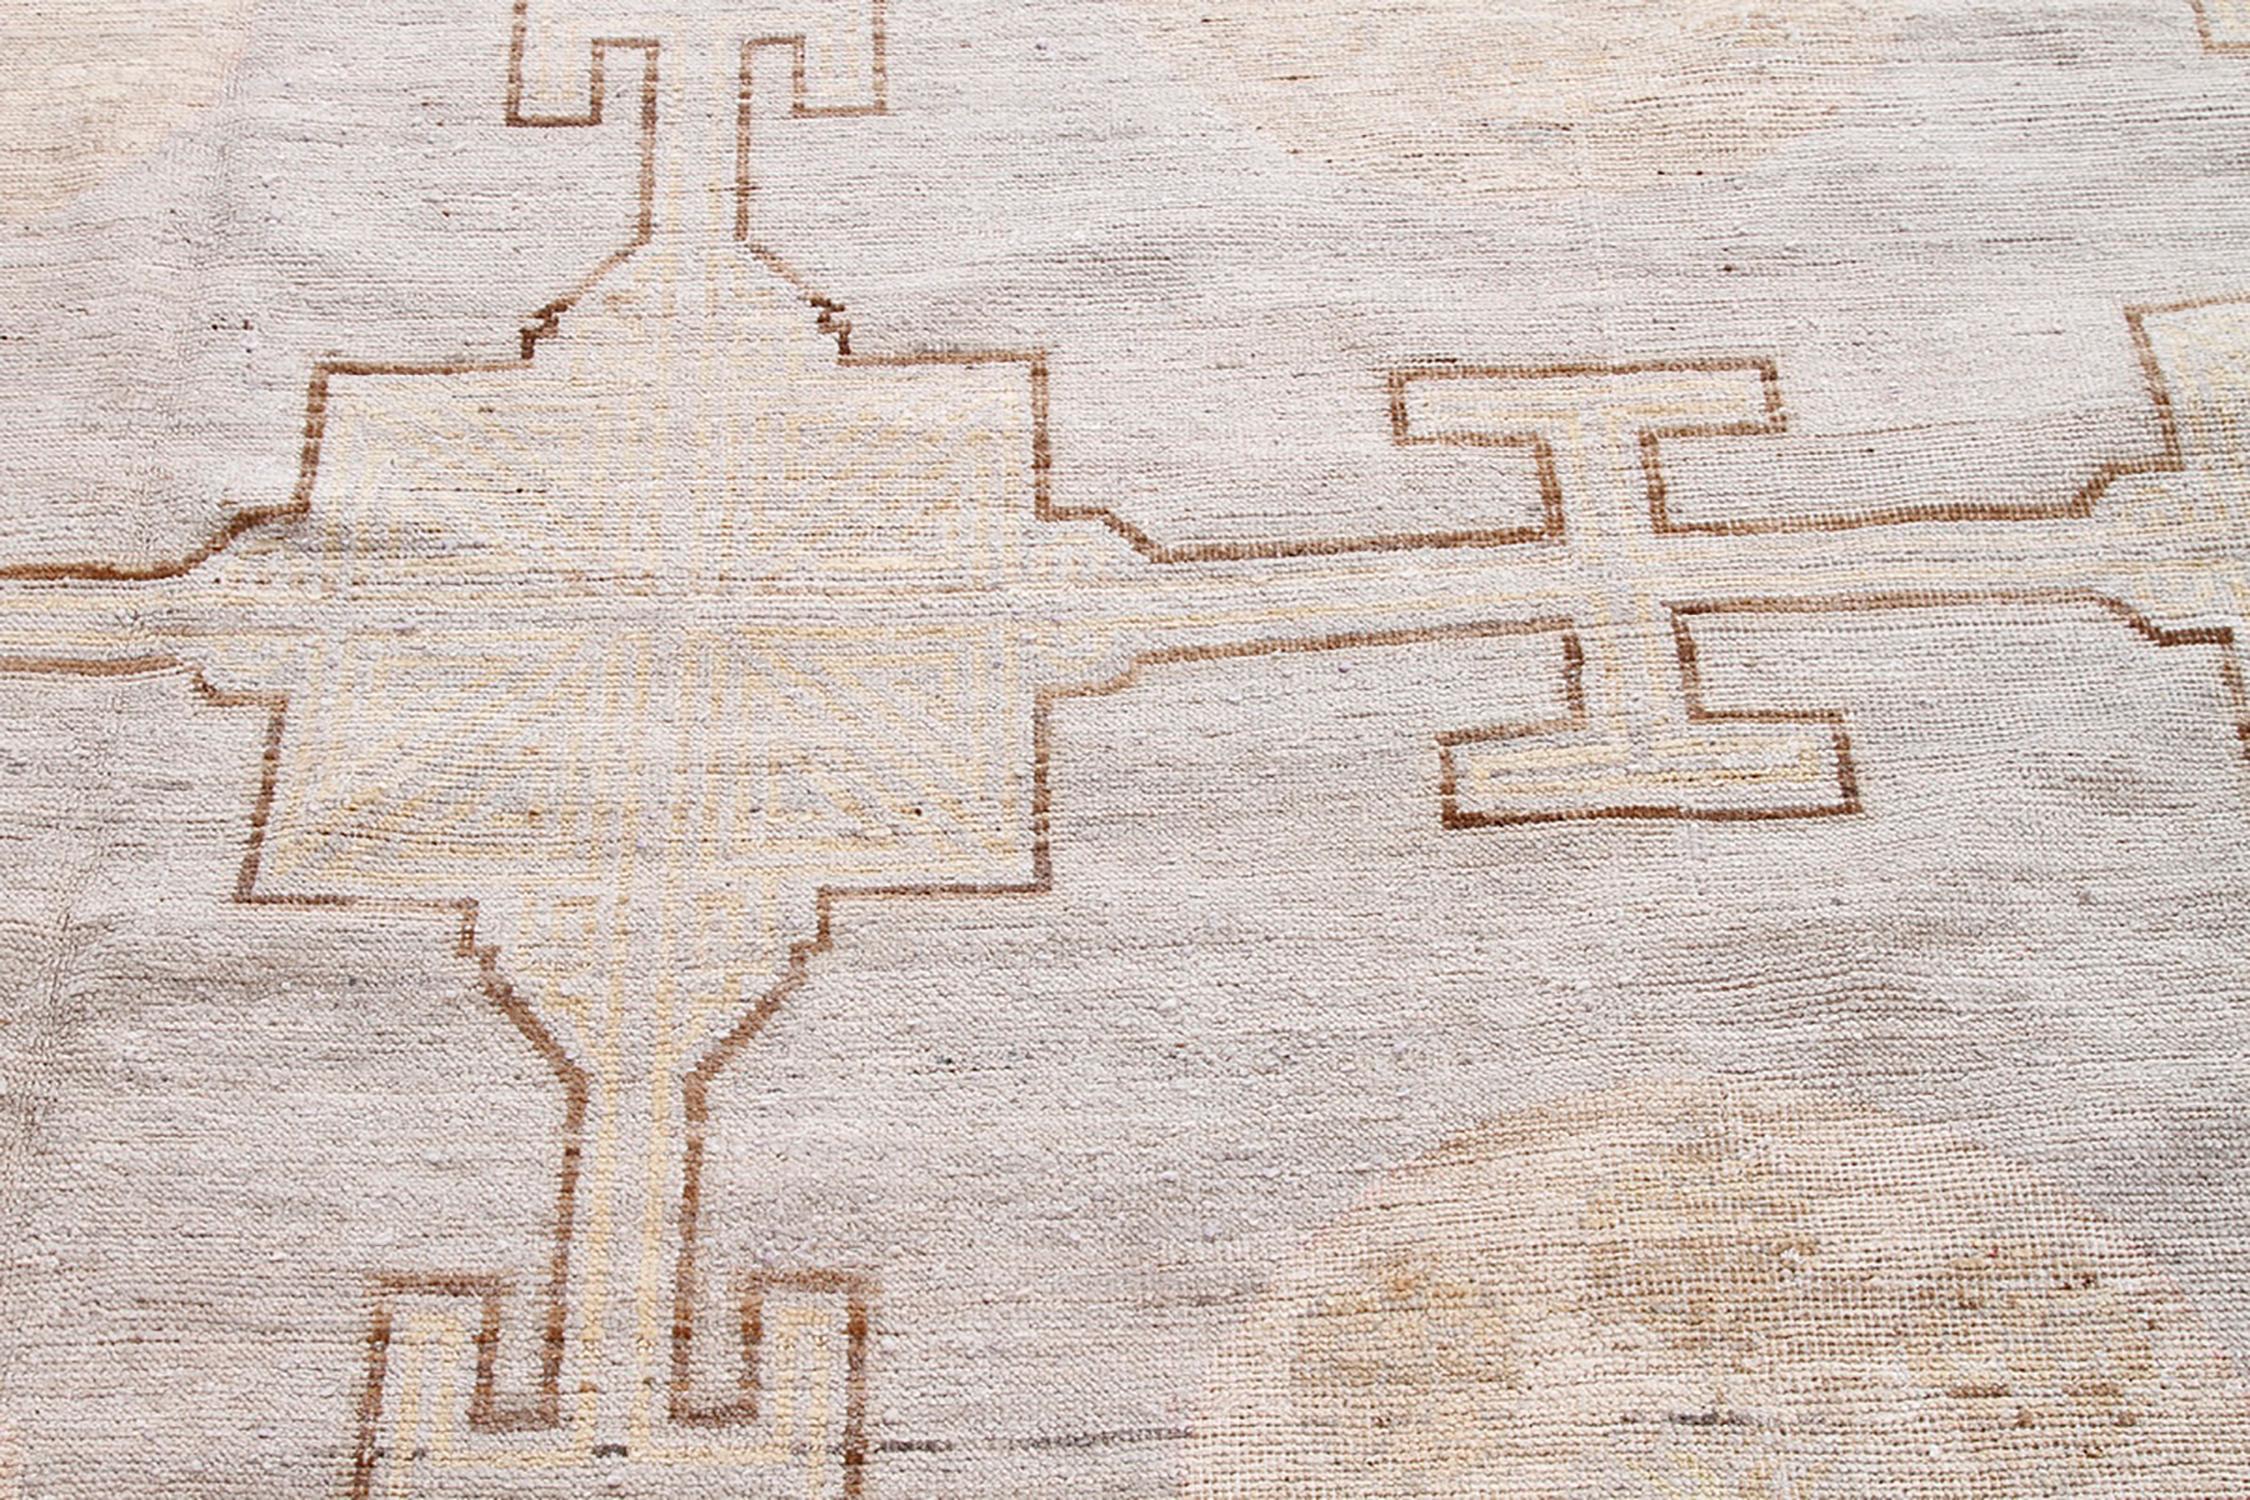 A 13 x 17 rug from the Modern Classics collection by Rug & Kilim, paying homage to some of the most celebrated styles in handmade flooring like this unique large-size nod to Khotan rug patterns.

On the Design: The new approach to scale alone